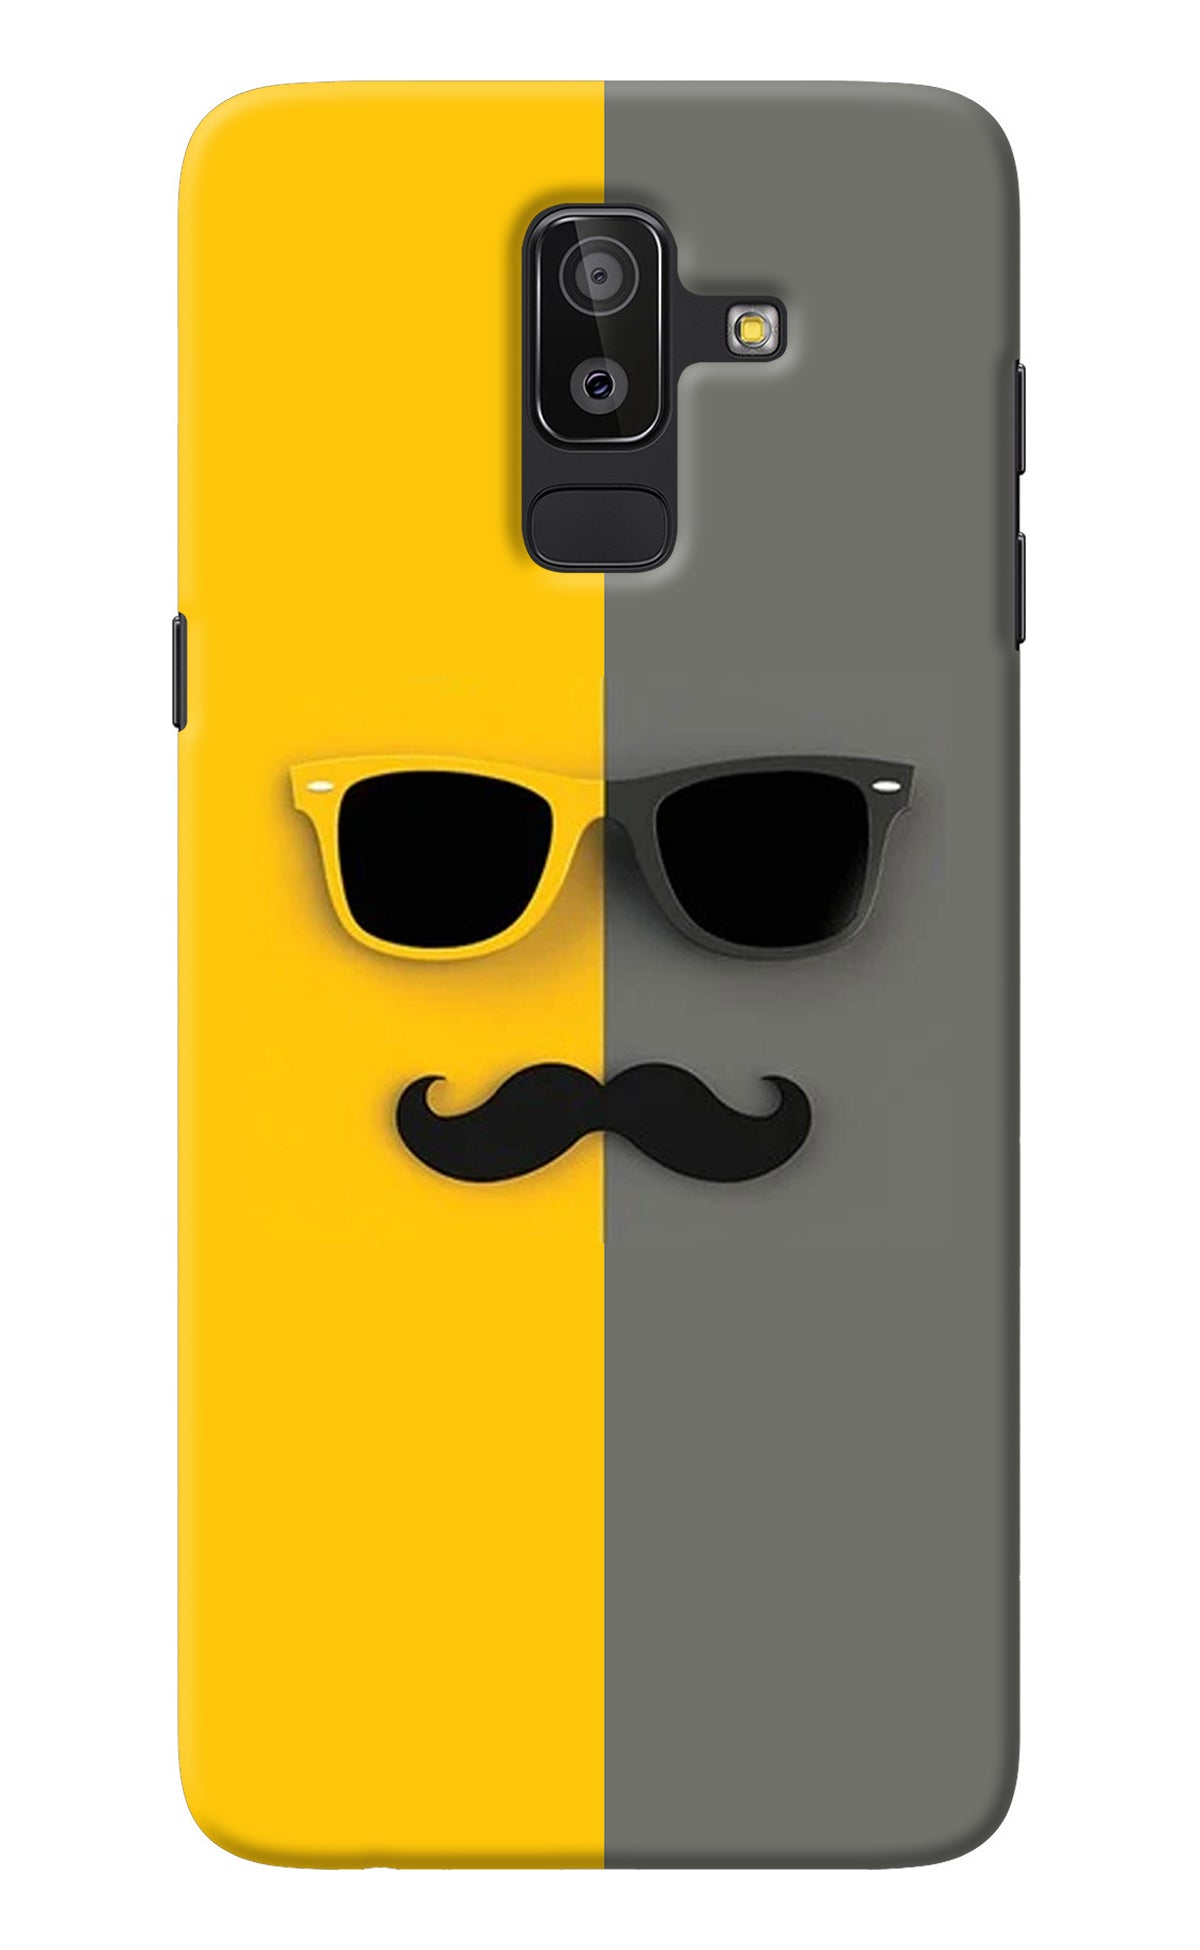 Sunglasses with Mustache Samsung J8 Back Cover